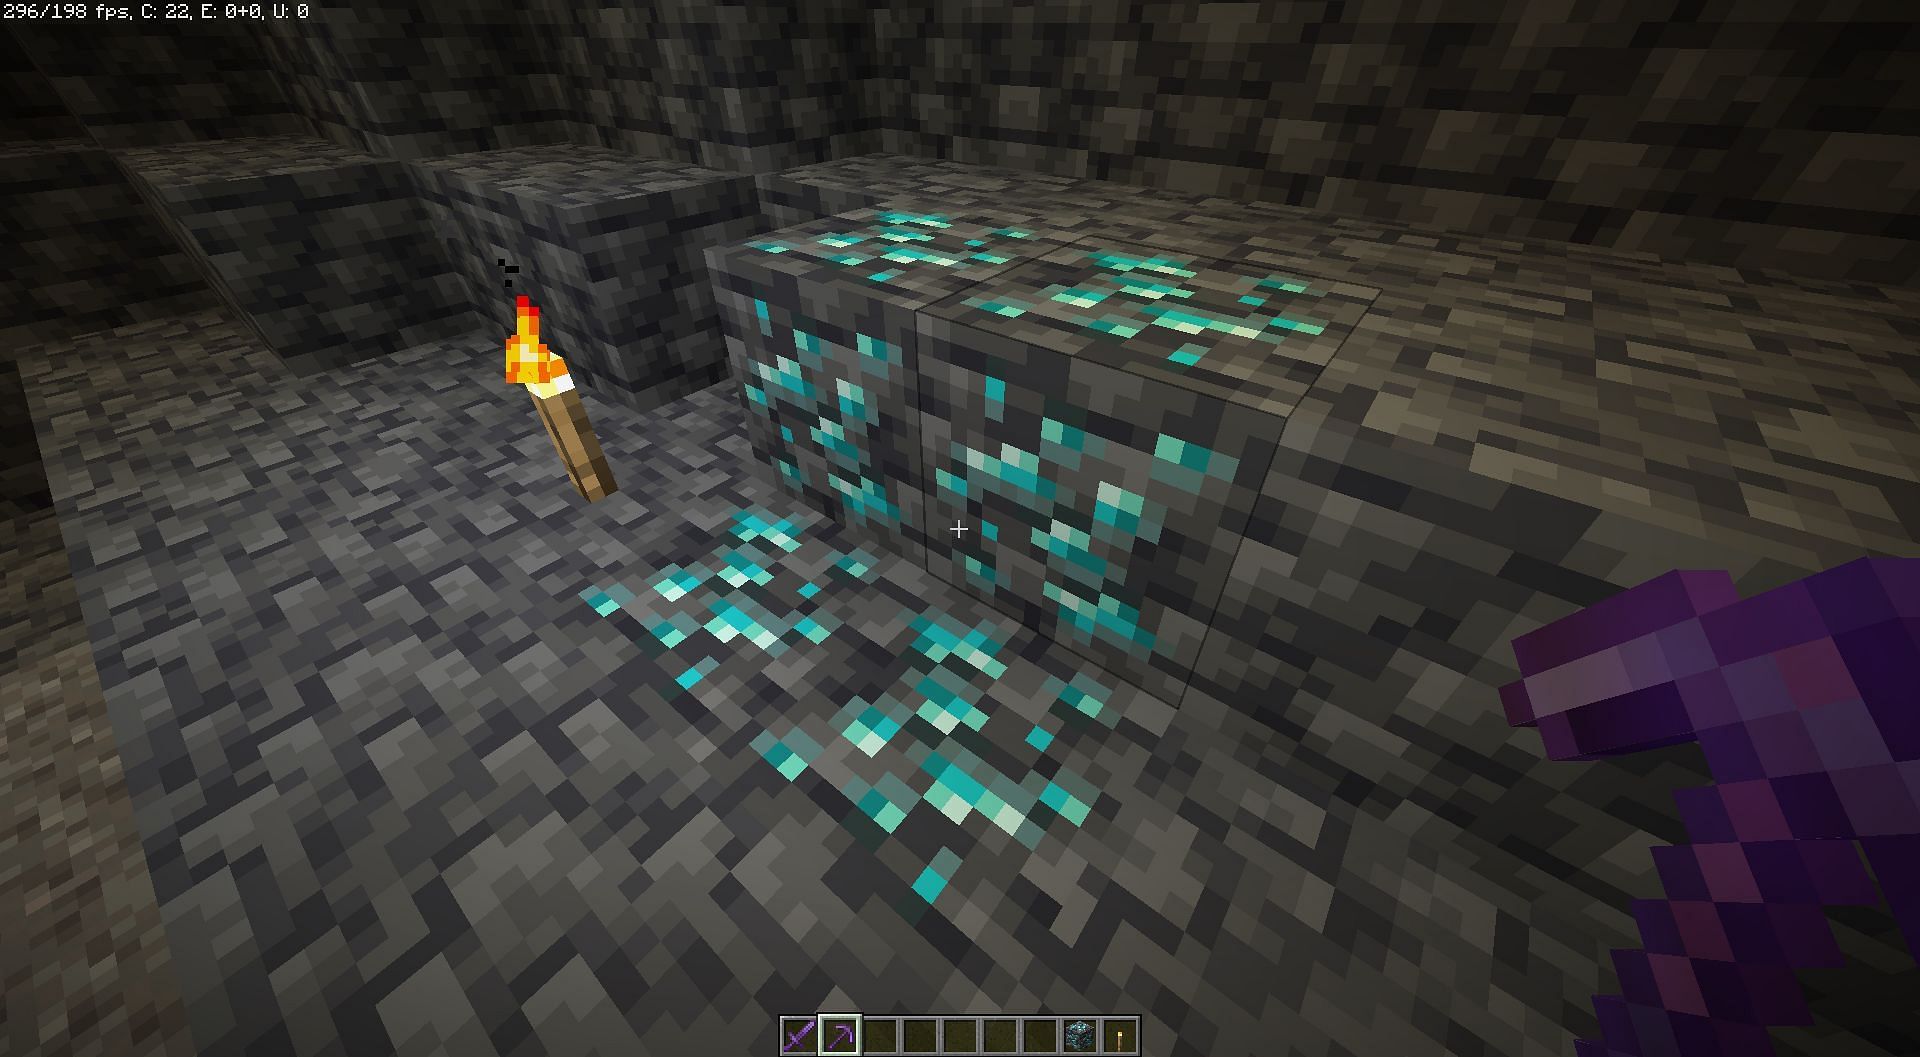 Players can also find diamonds from looting various structures in Minecraft (Image via Mojang)